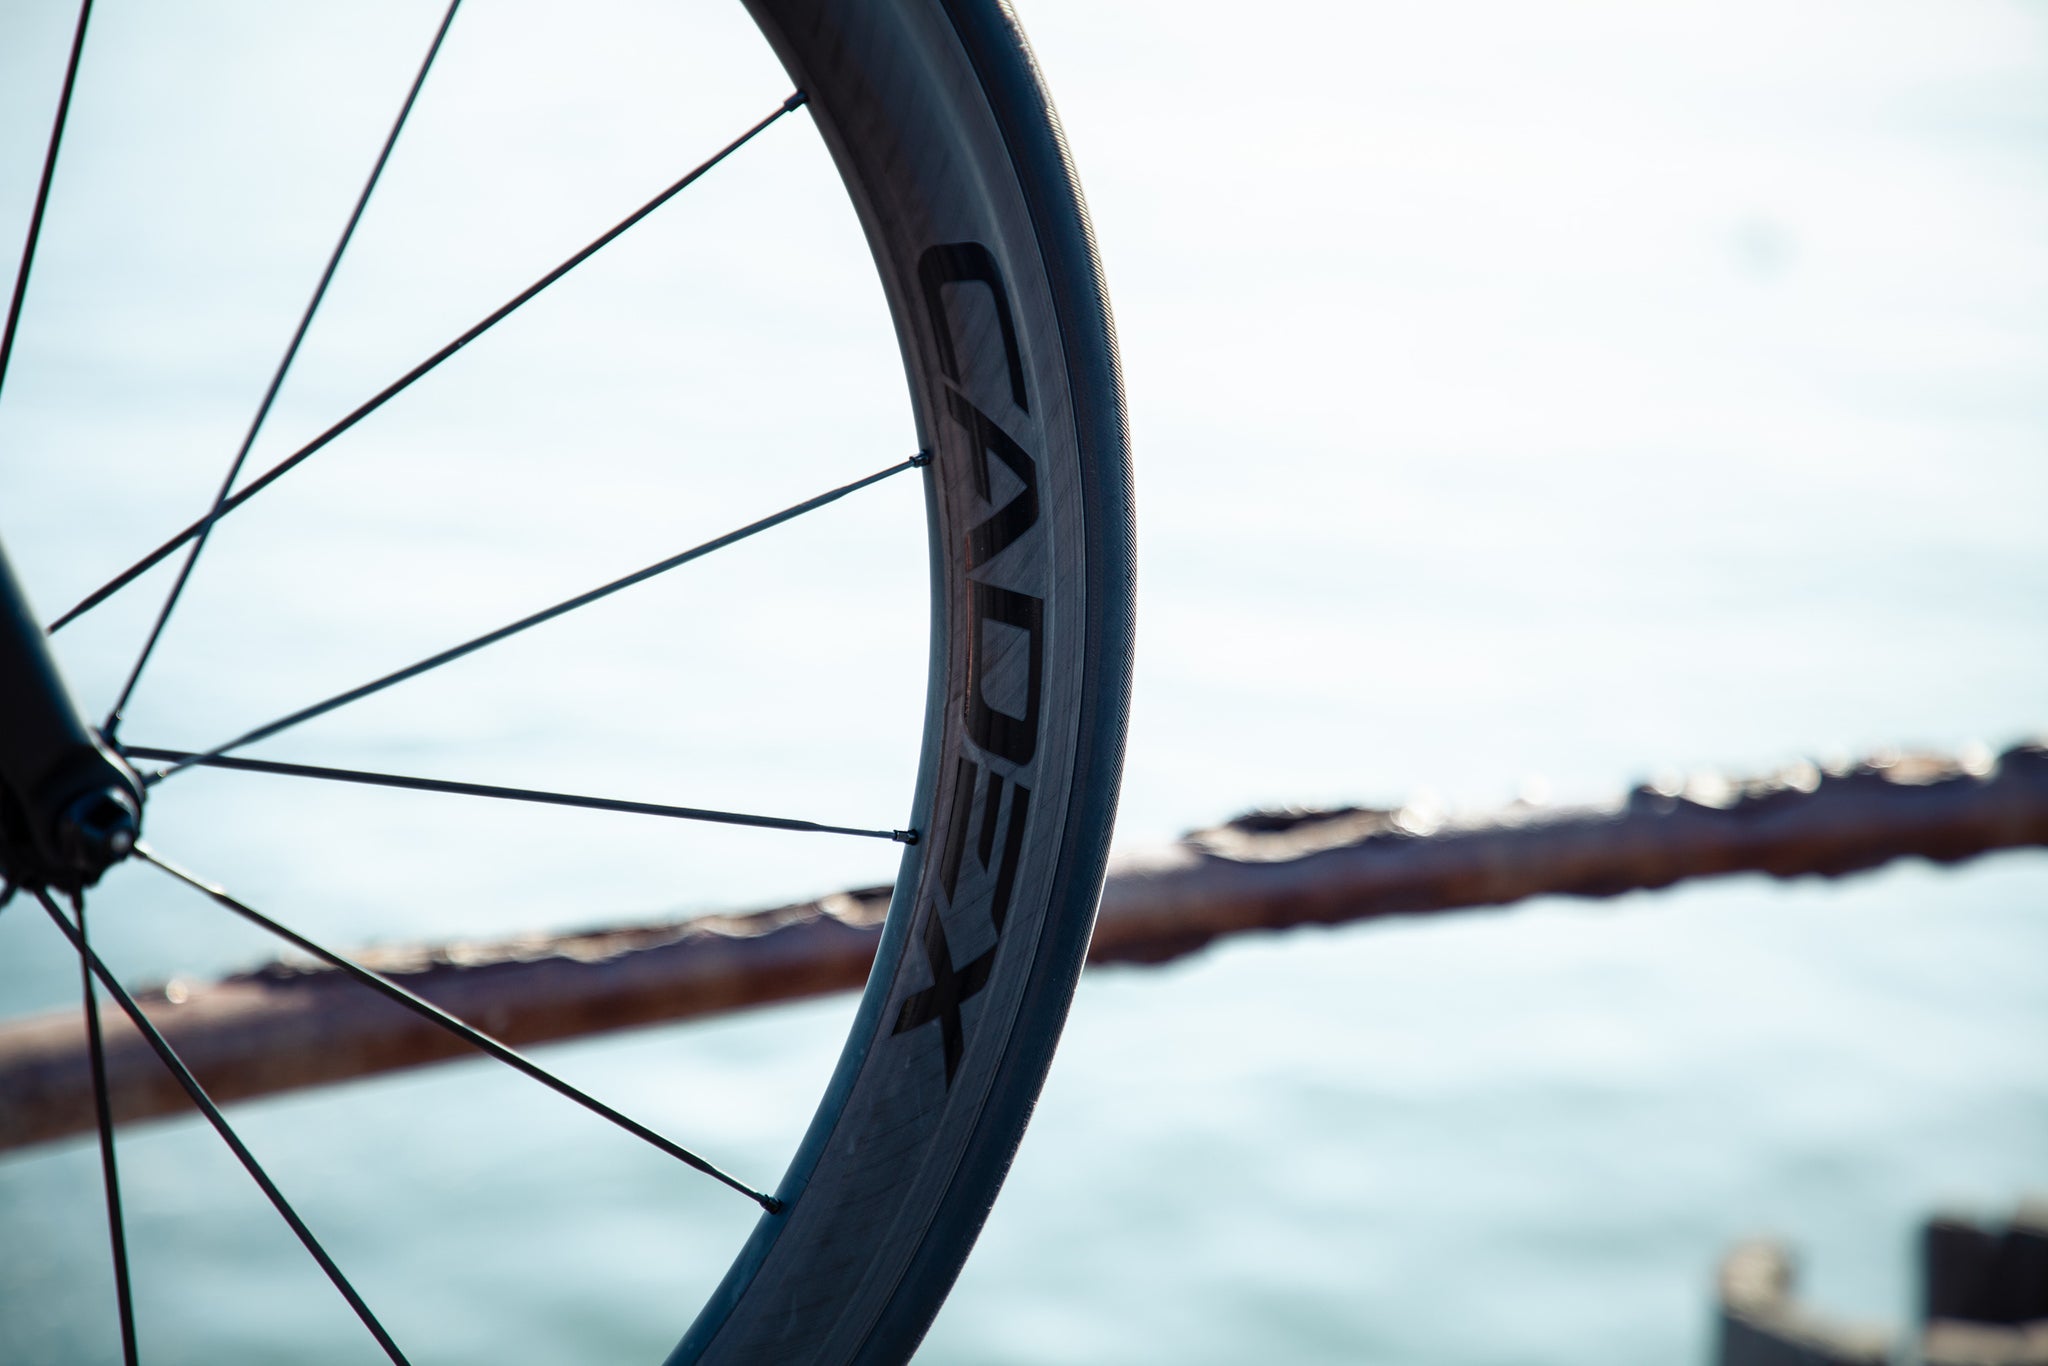 Riding the Cadex 42s: The Way Too Early New Wheel Review